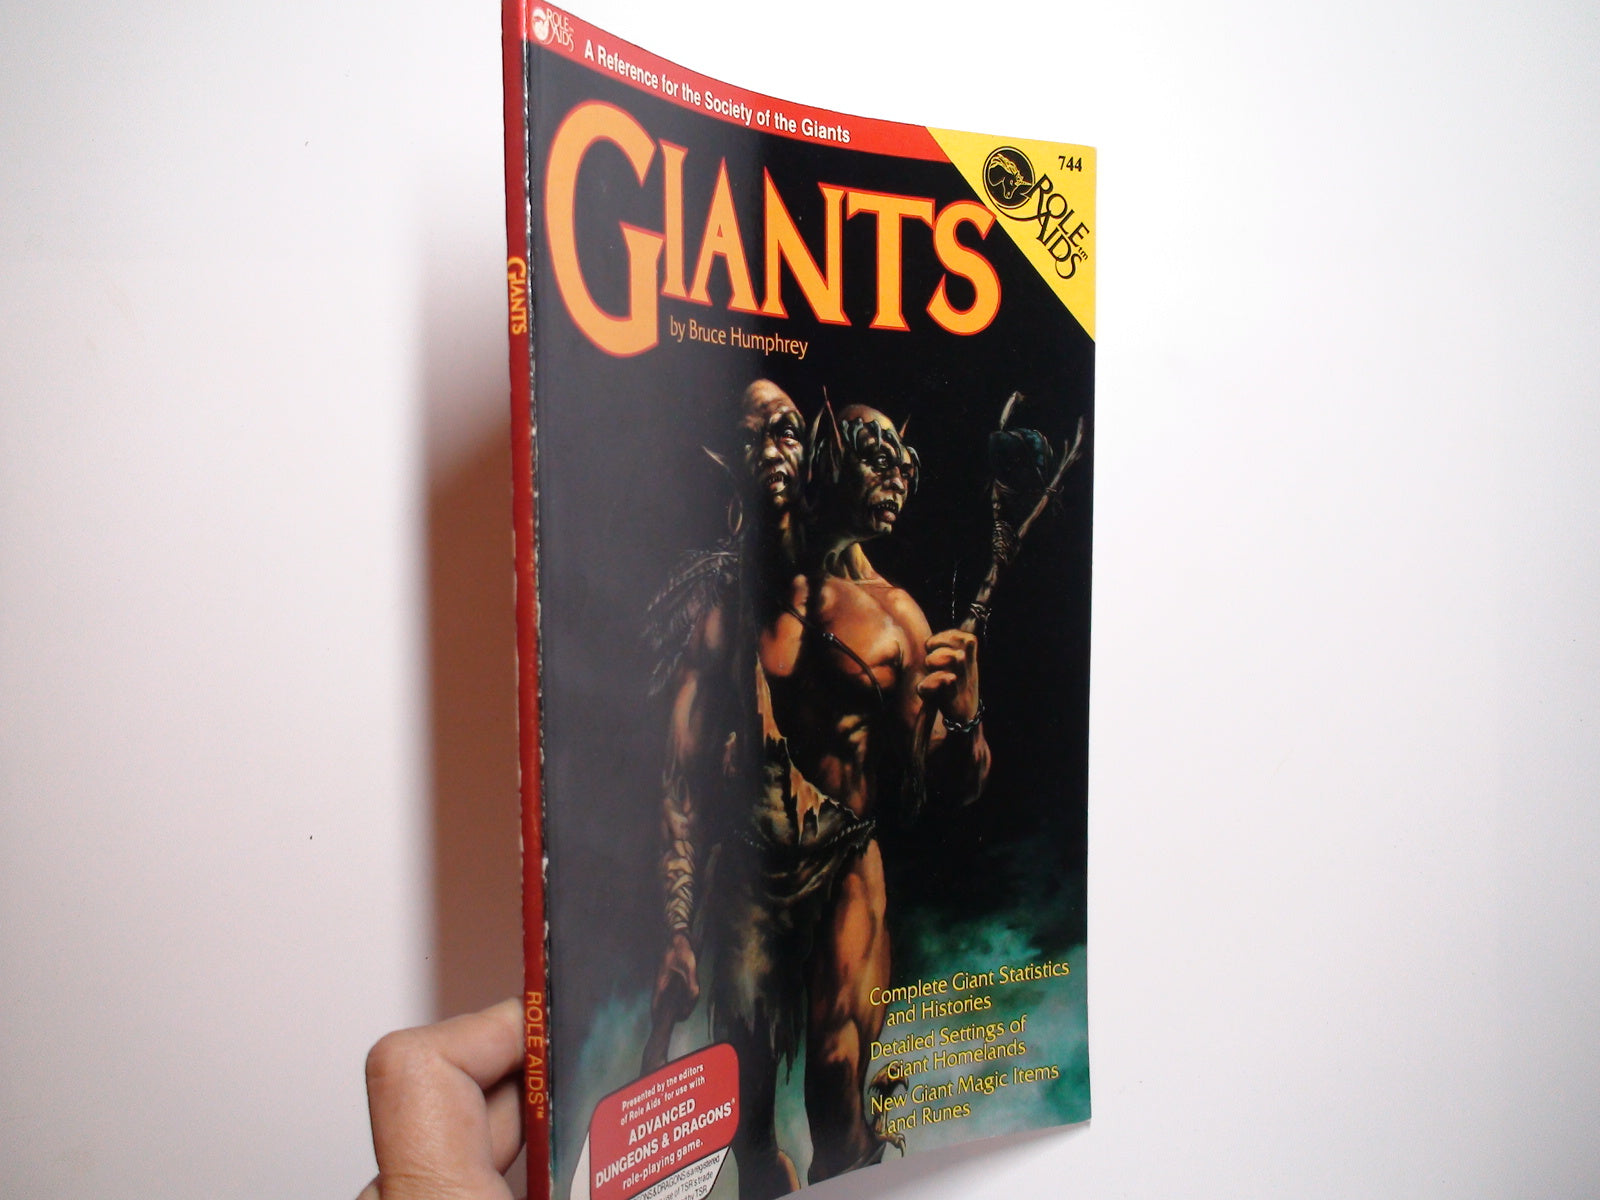 Giants by Bruce Humphrey, Role Aids #744, Mayfair Games Inc, Illustrated, 1987